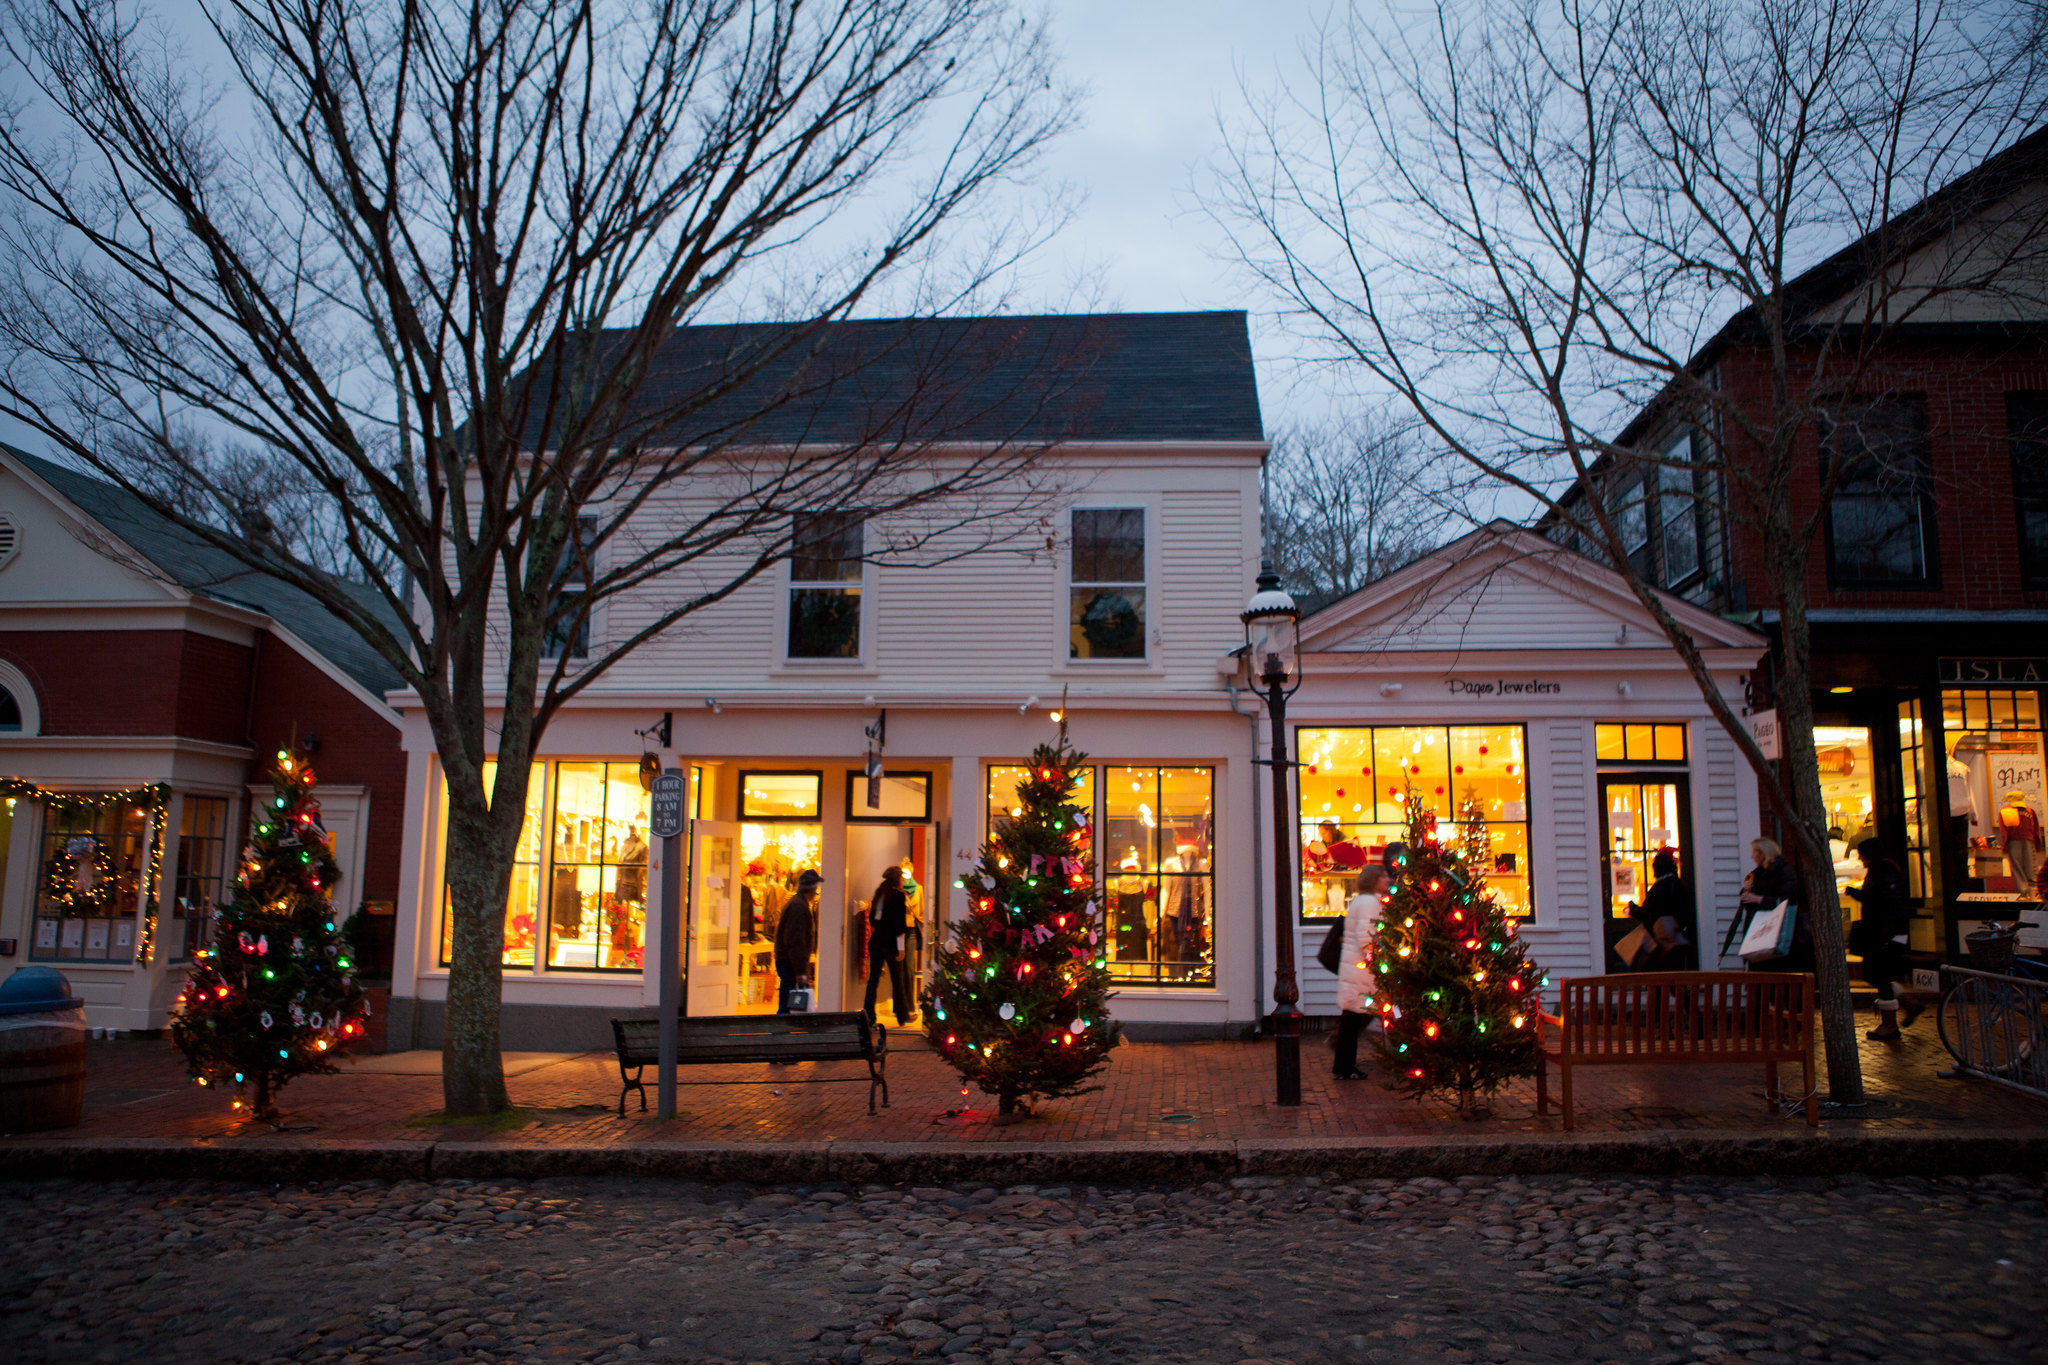 Stroll nantucket christmas winter december turns ladies island transformed whaling glittering wonderland once festival month again museum long into will